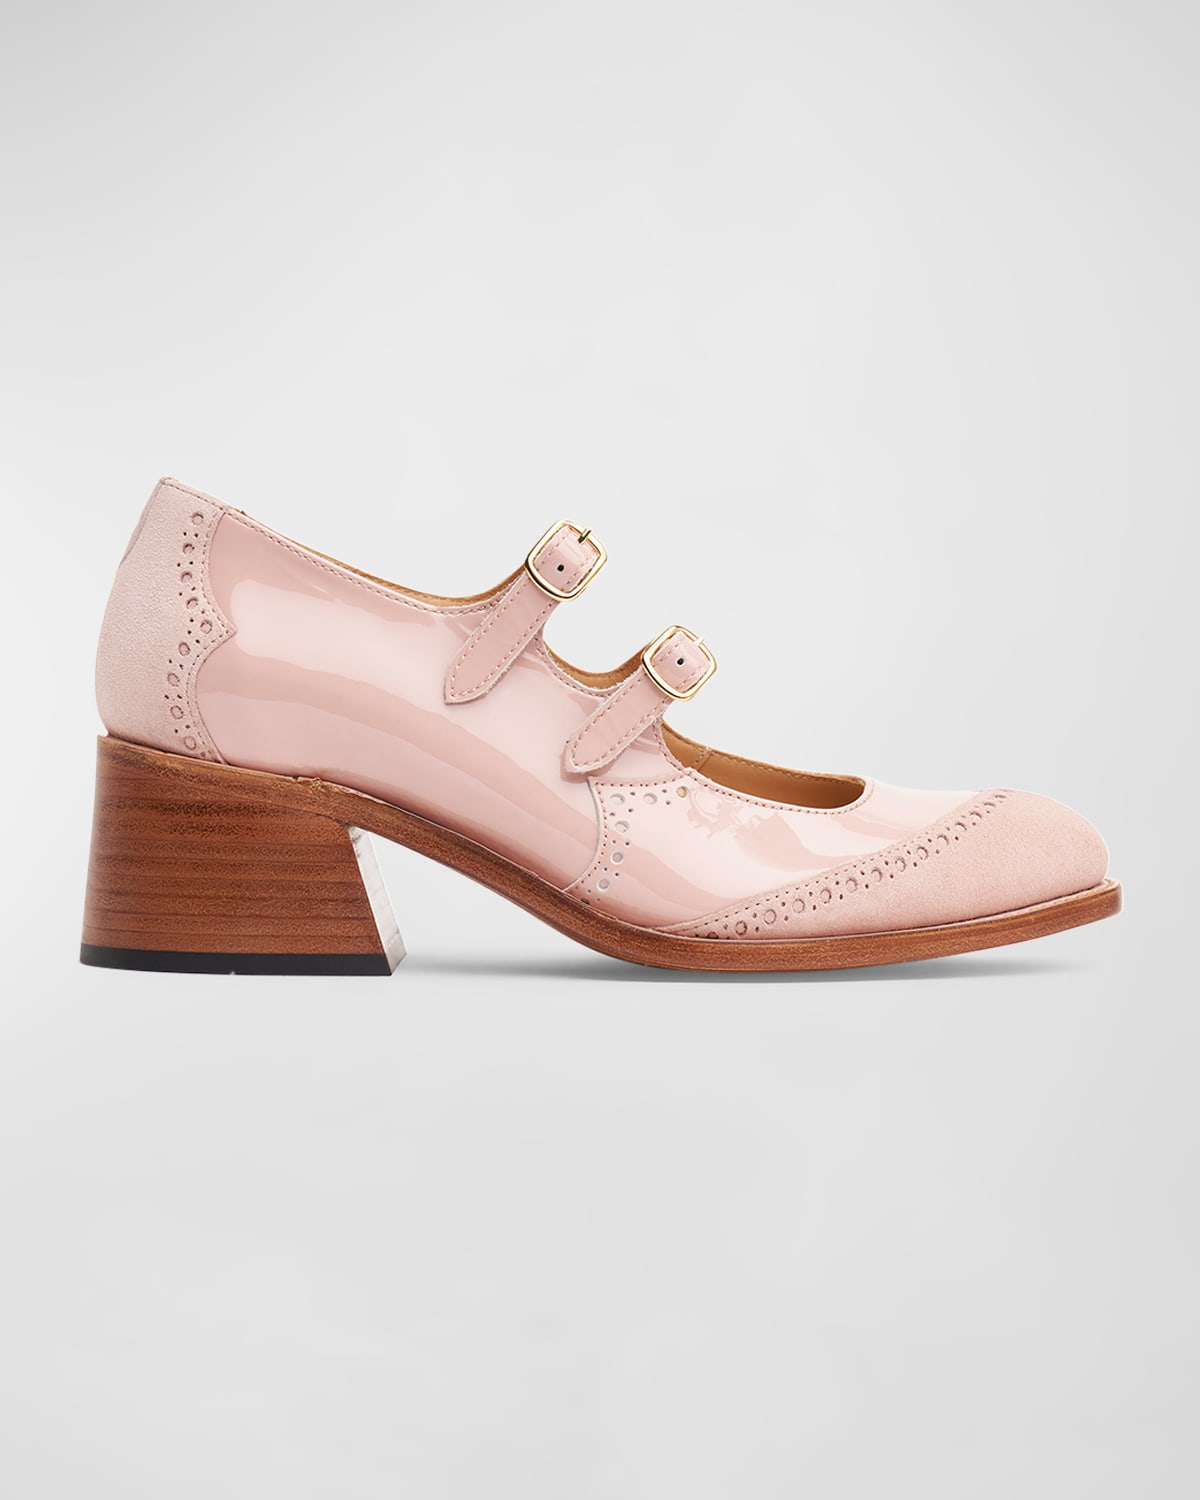 Miss Amlie Mixed Leather Mary Jane Pumps